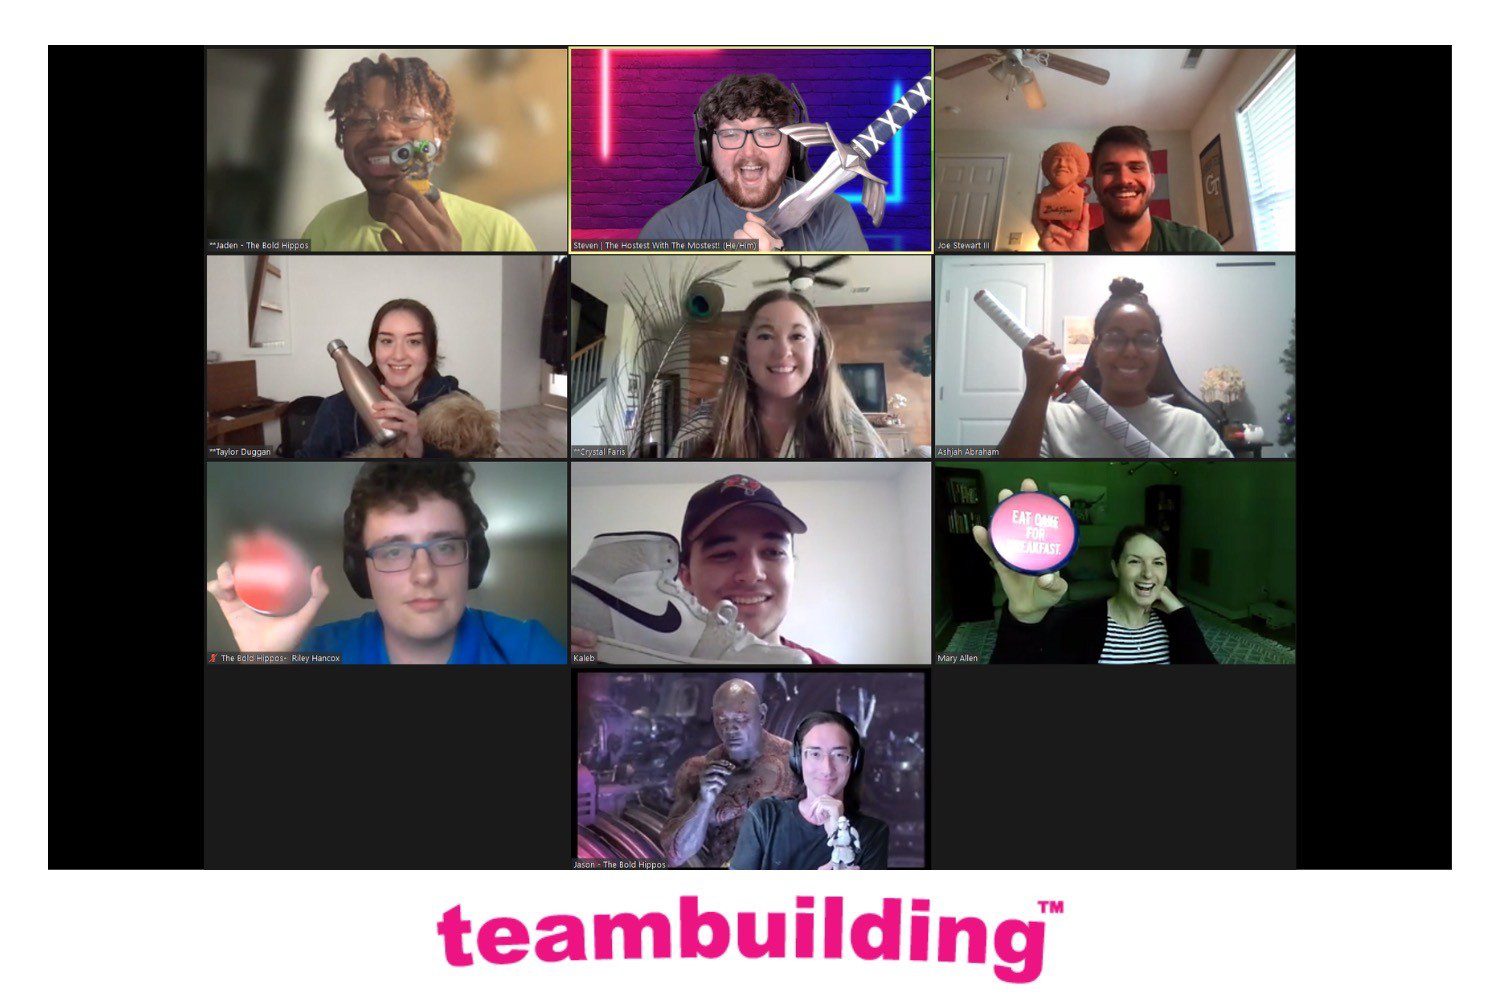 Group of Interns and Young Professionals Having Fun During During Team Building Video Call